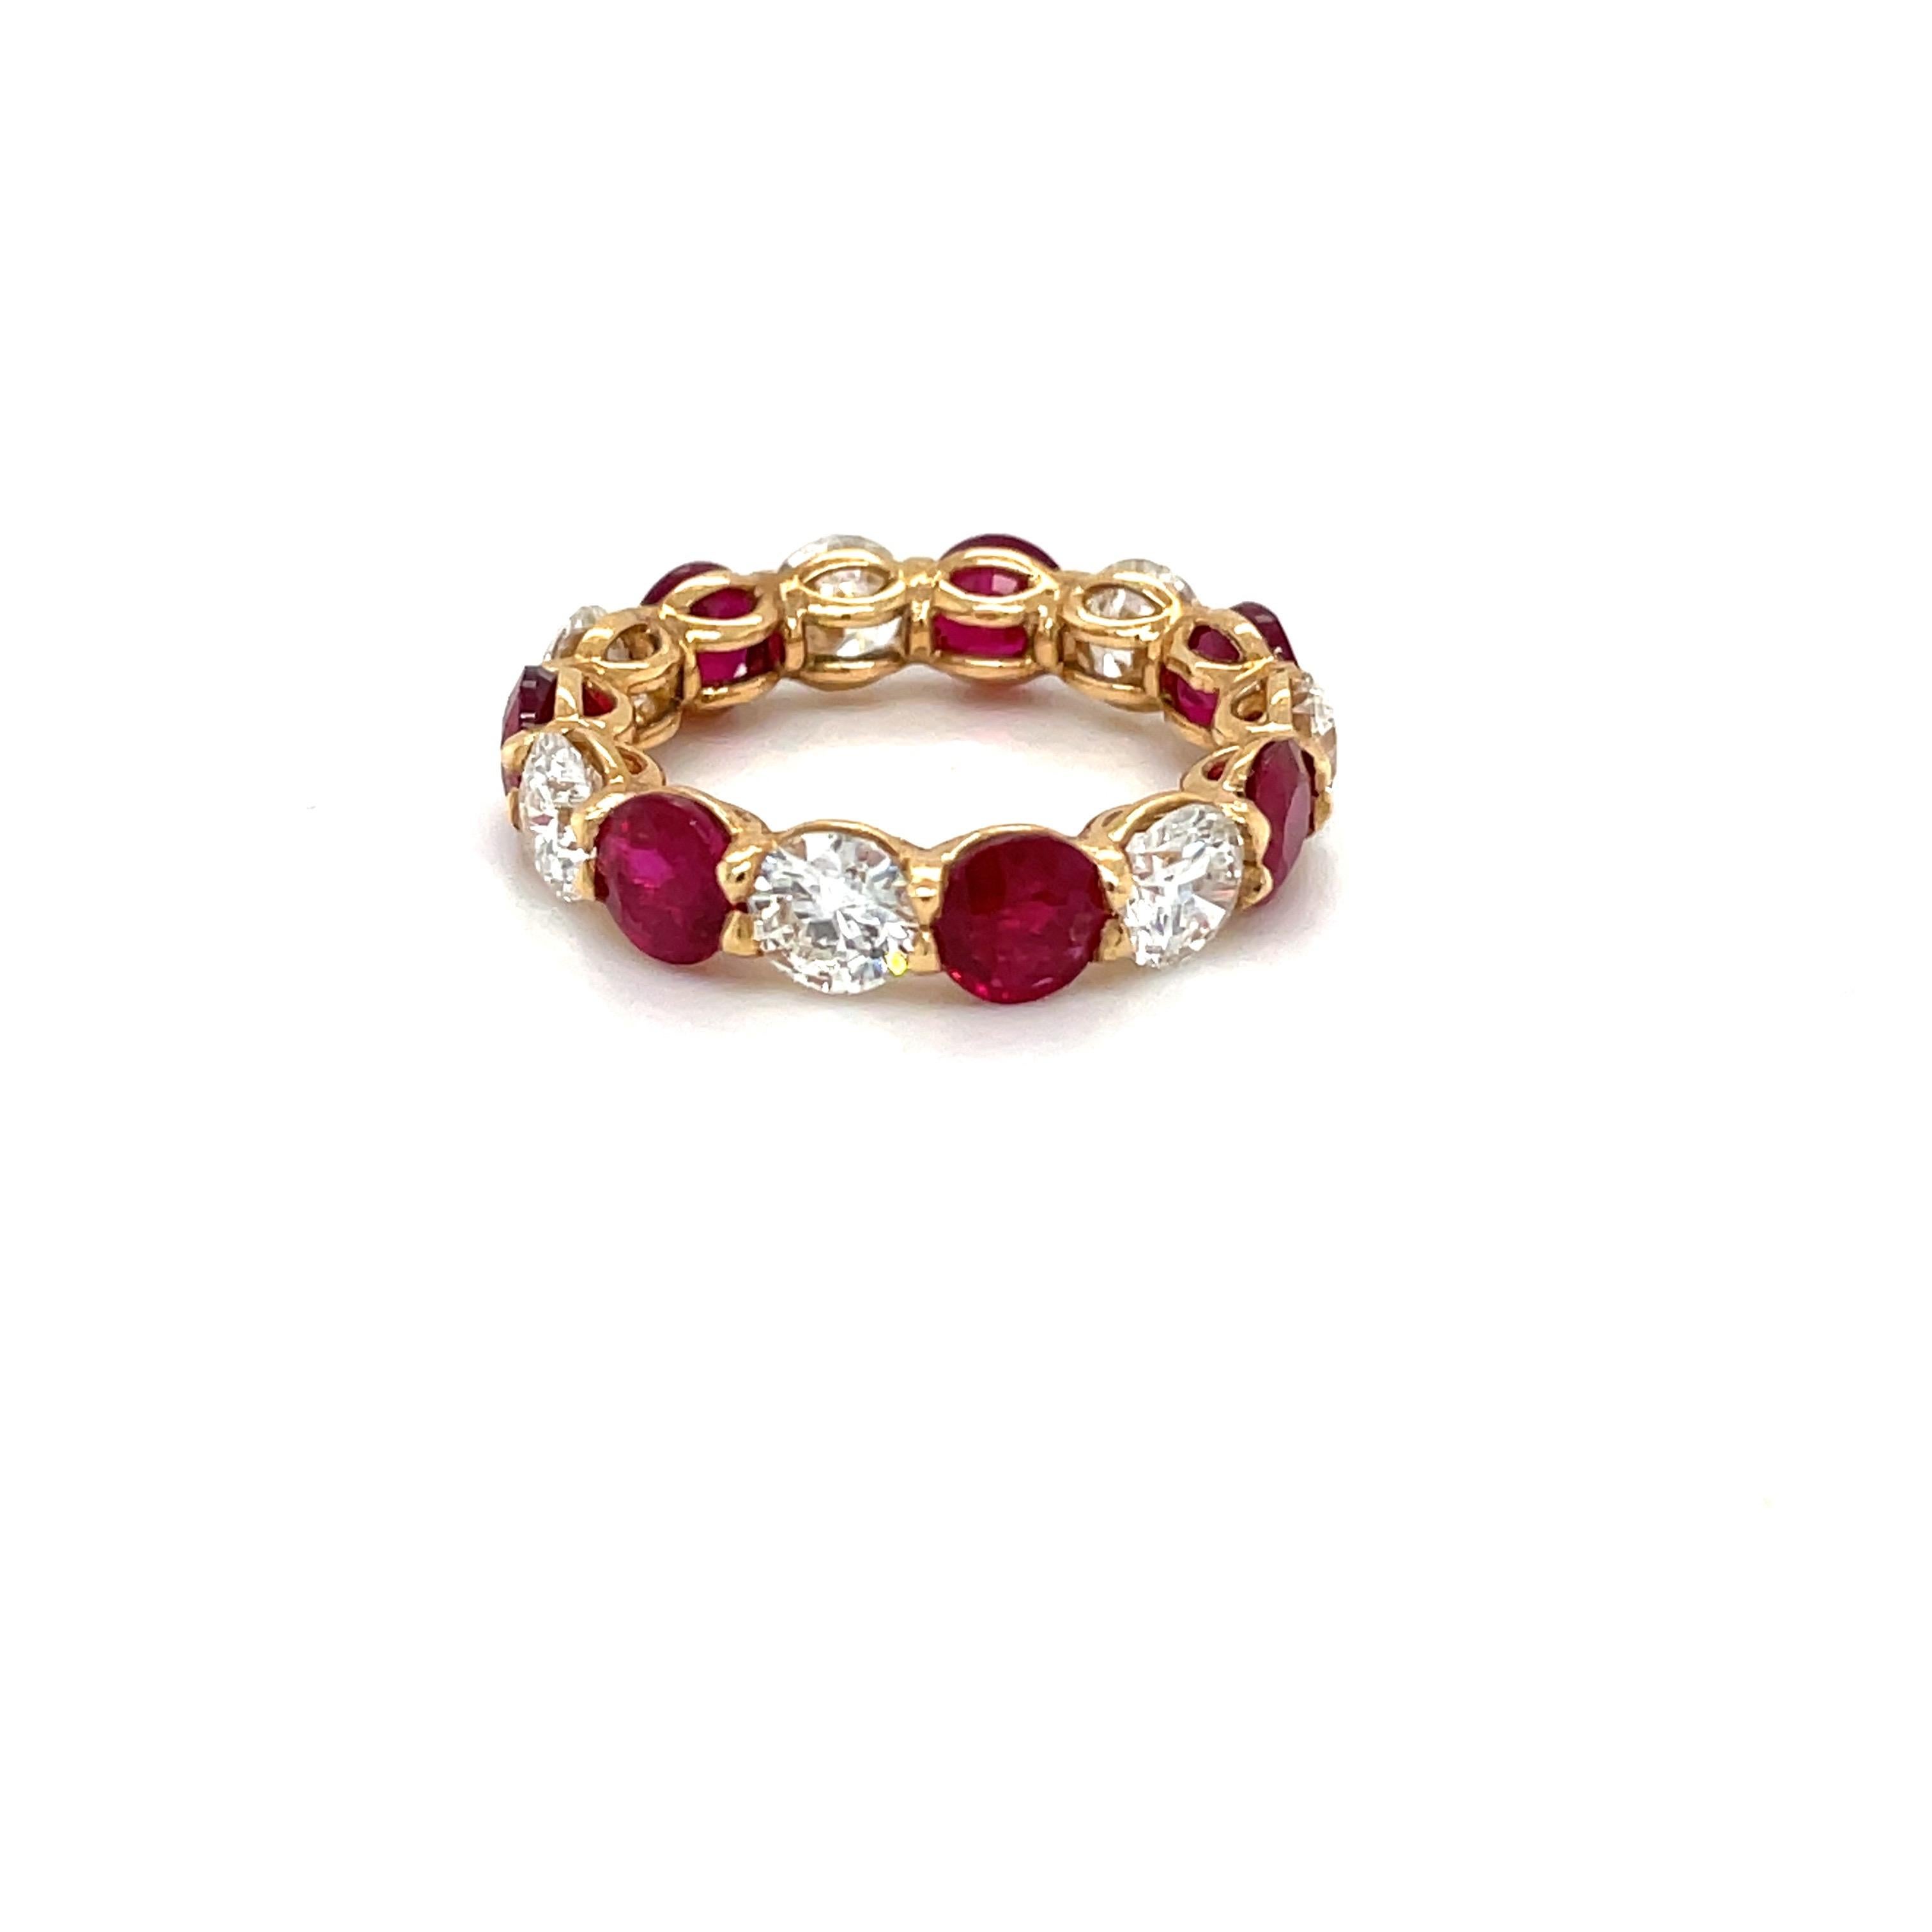 Round rubies and diamonds alternate in a Cellini handmade, shared-prong setting in 18-karat yellow gold.
Custom sizes and weights available. We also offer the same rings in emerald and blue sapphire. They look great stacked or alone.
7 Diamonds =